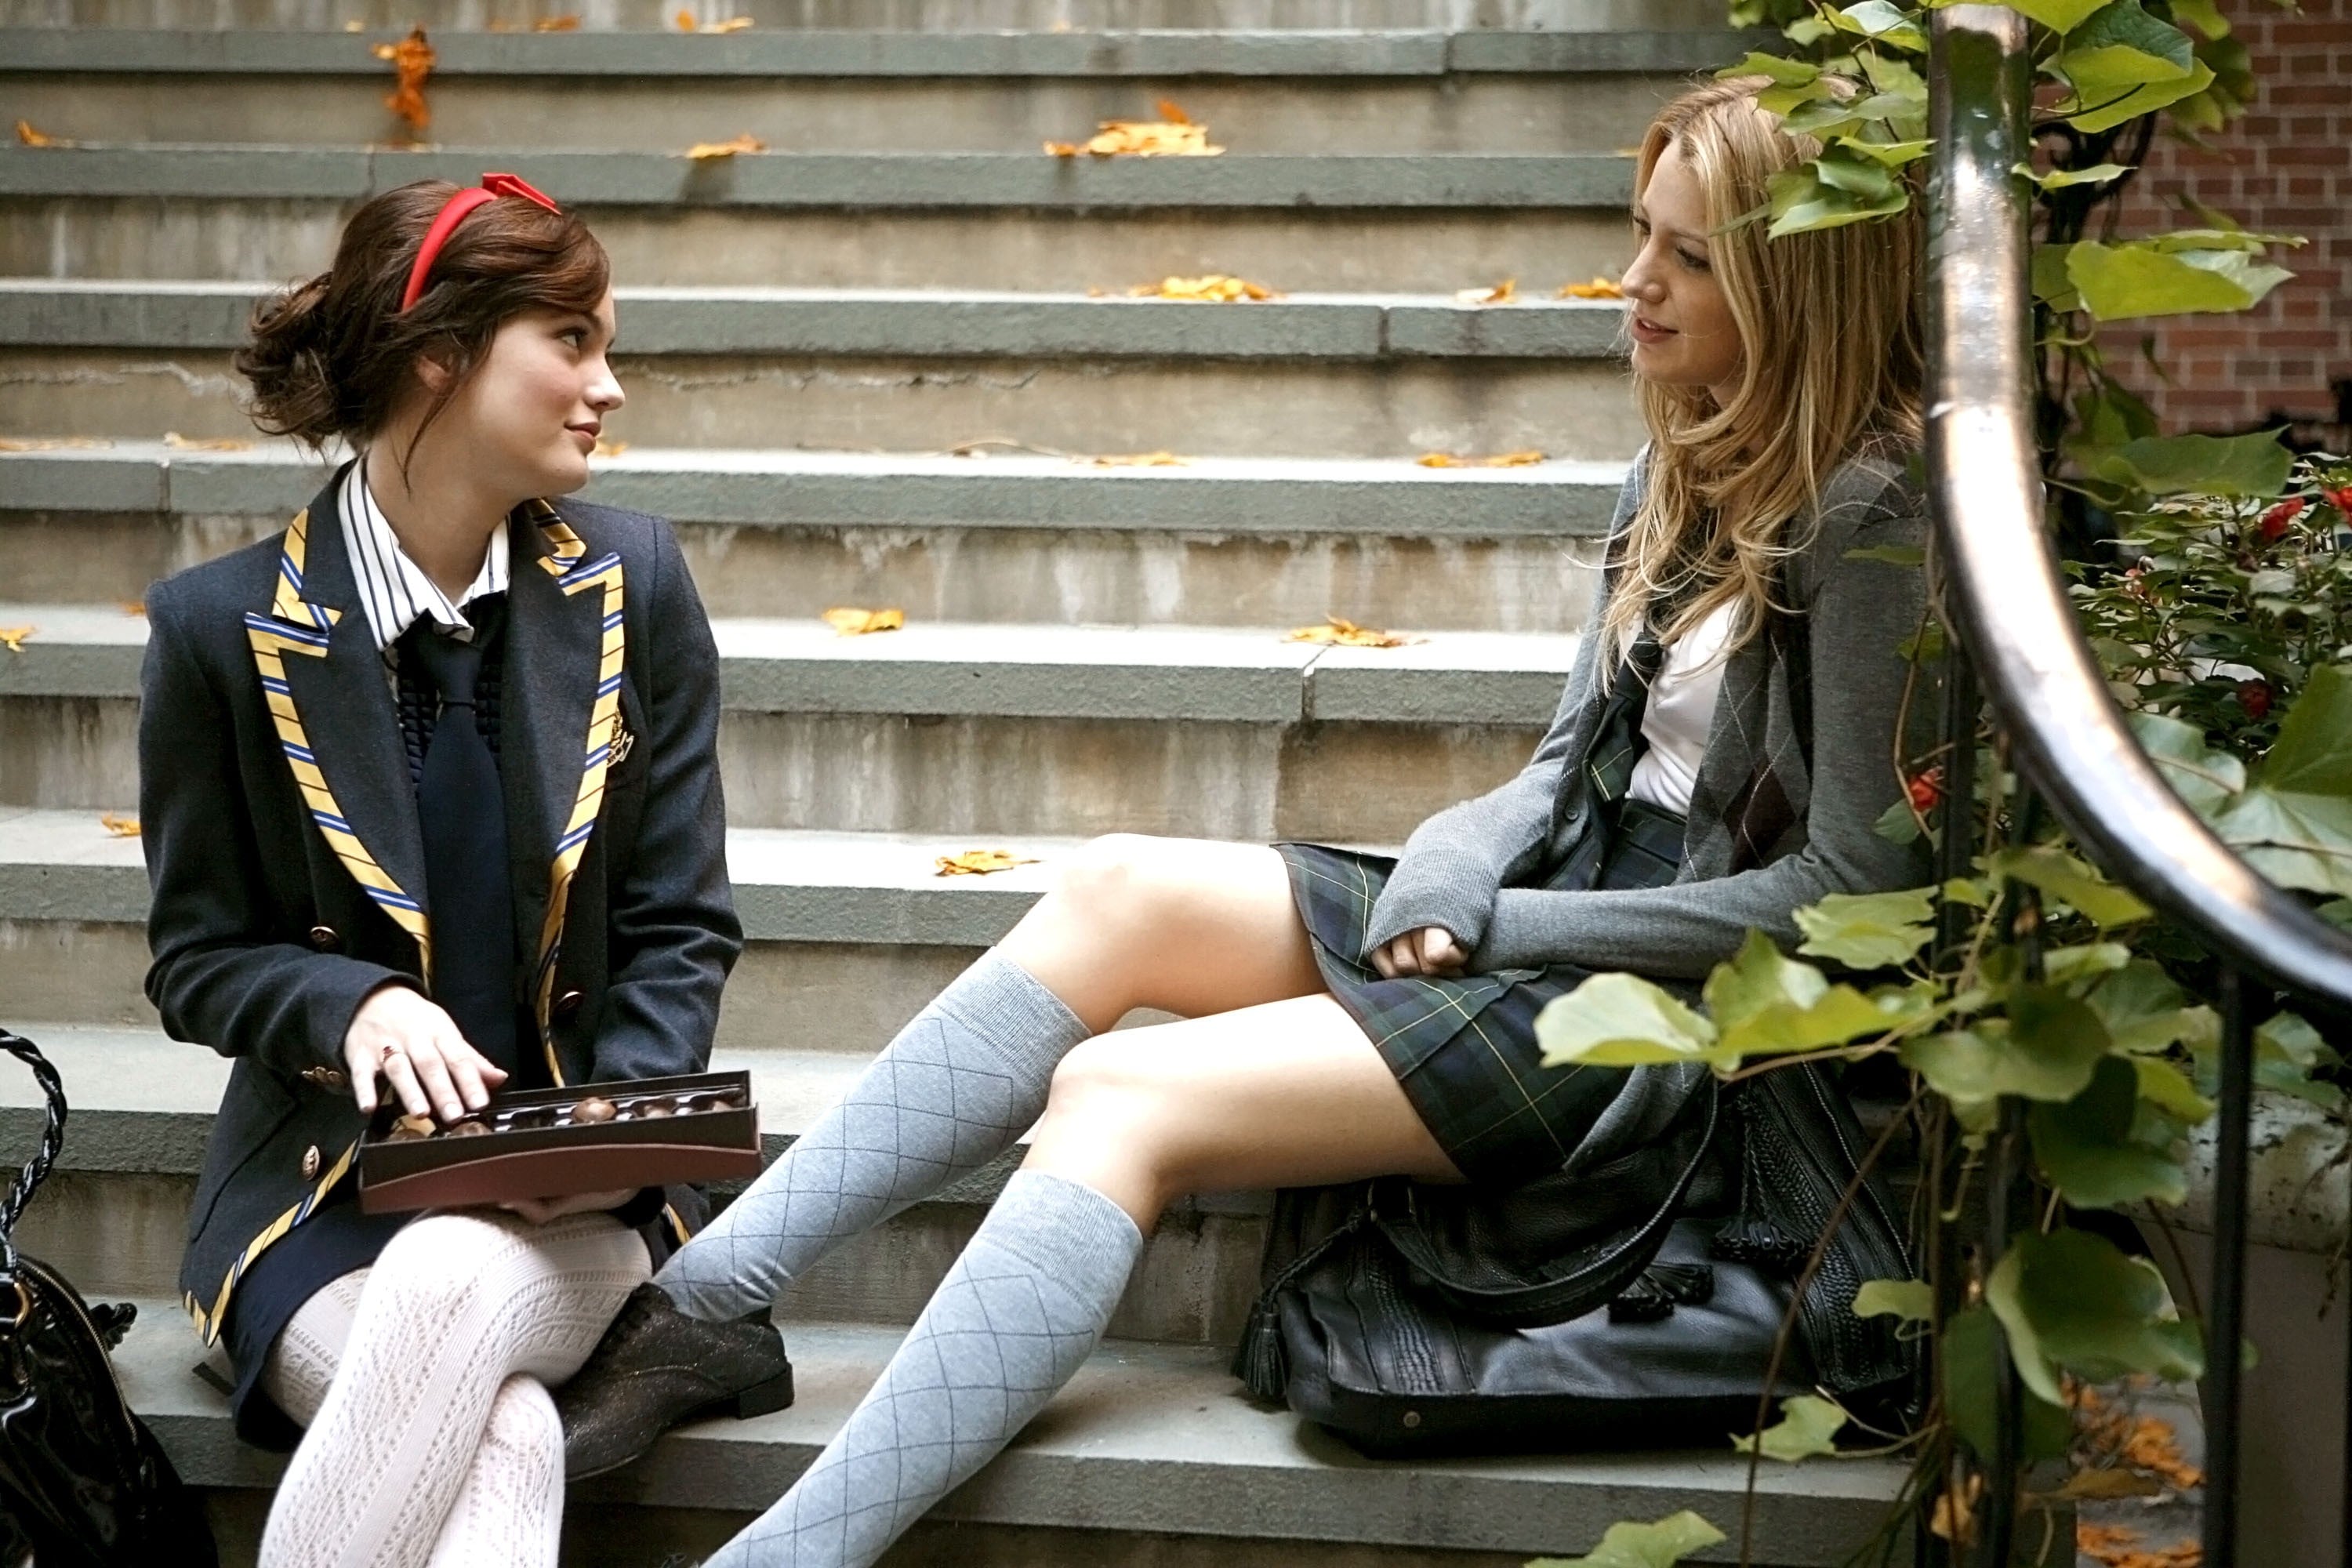 Gossip Girl: 10 Differences Between Serena In The Books & The TV Show